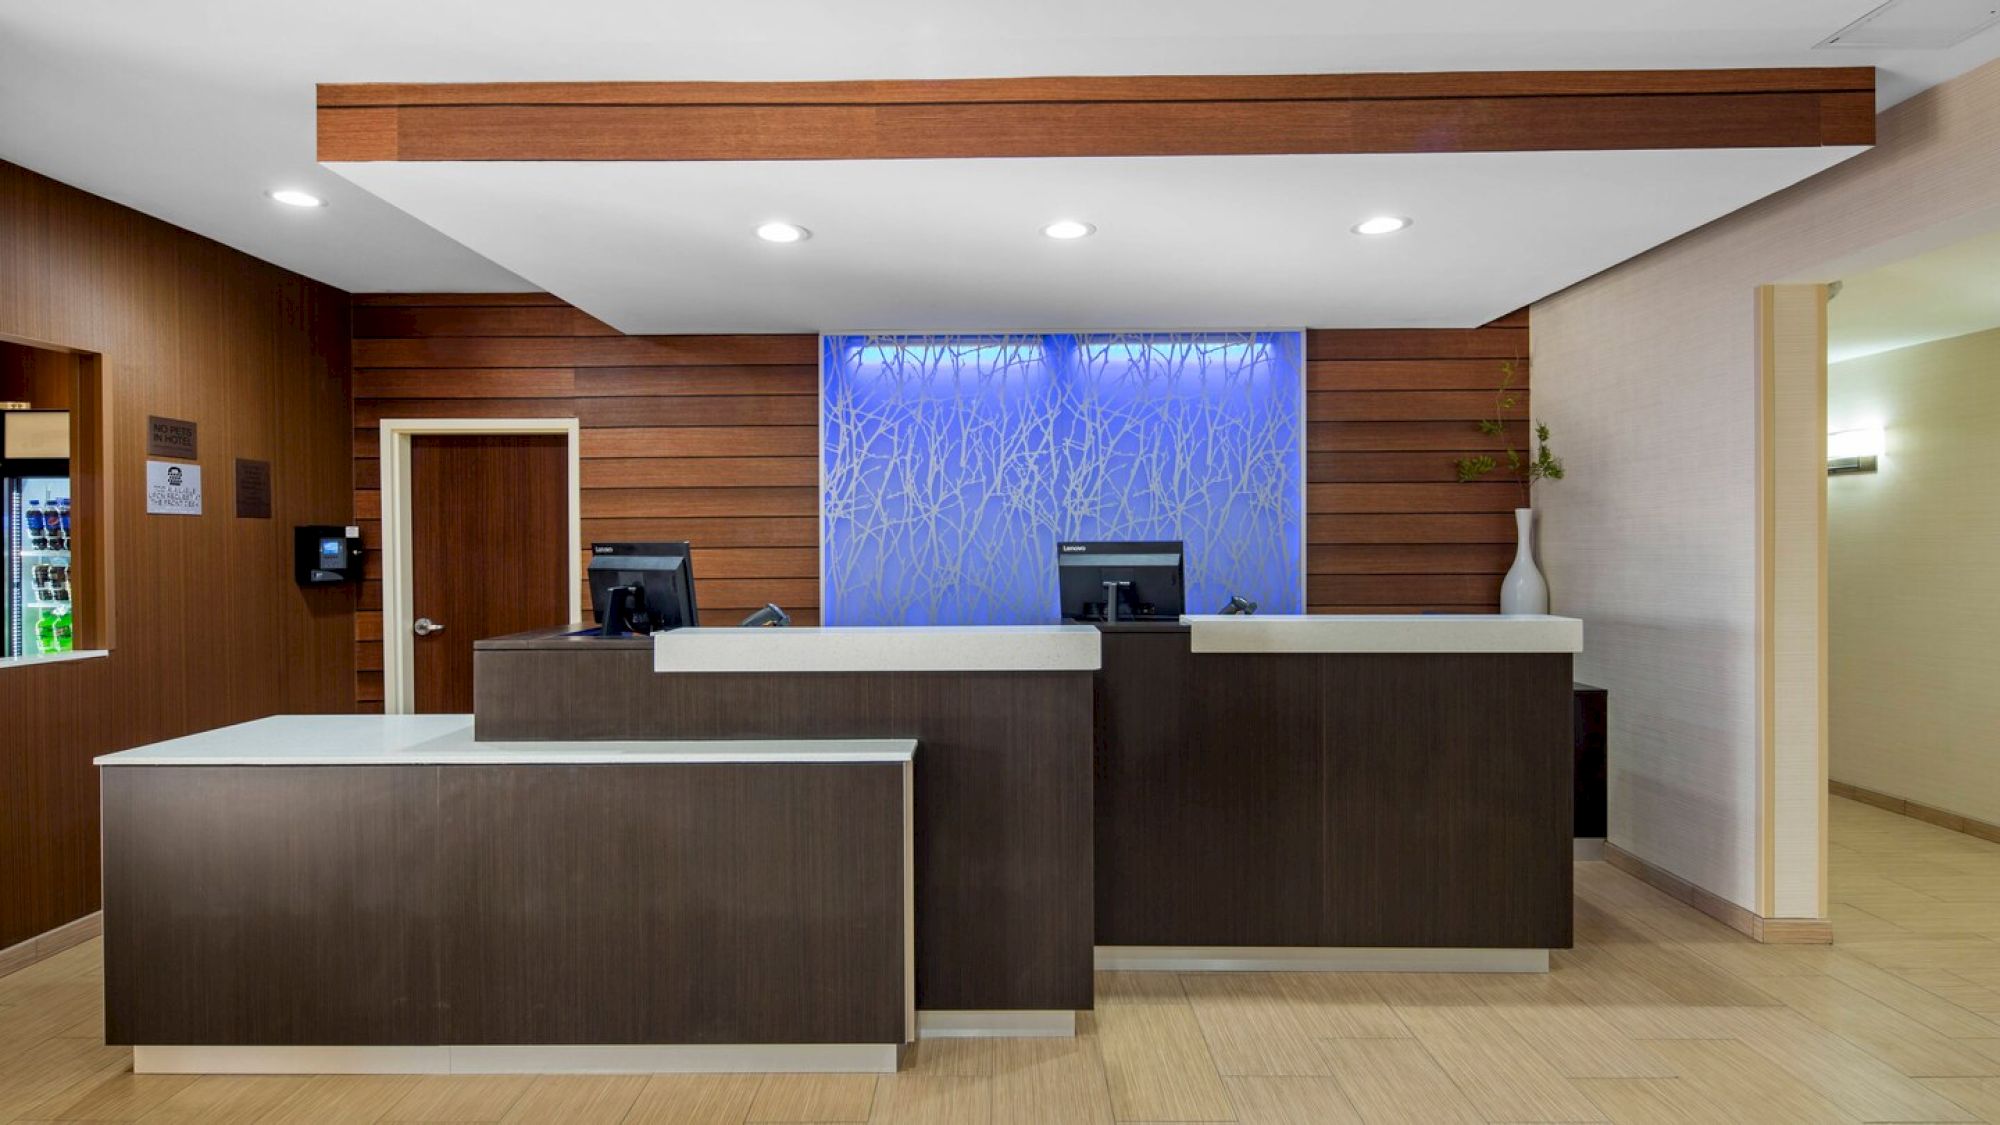 A modern hotel reception desk with wood paneling, two stations with computers, and a blue lighted background. Decor includes a vase and abstract wall art.